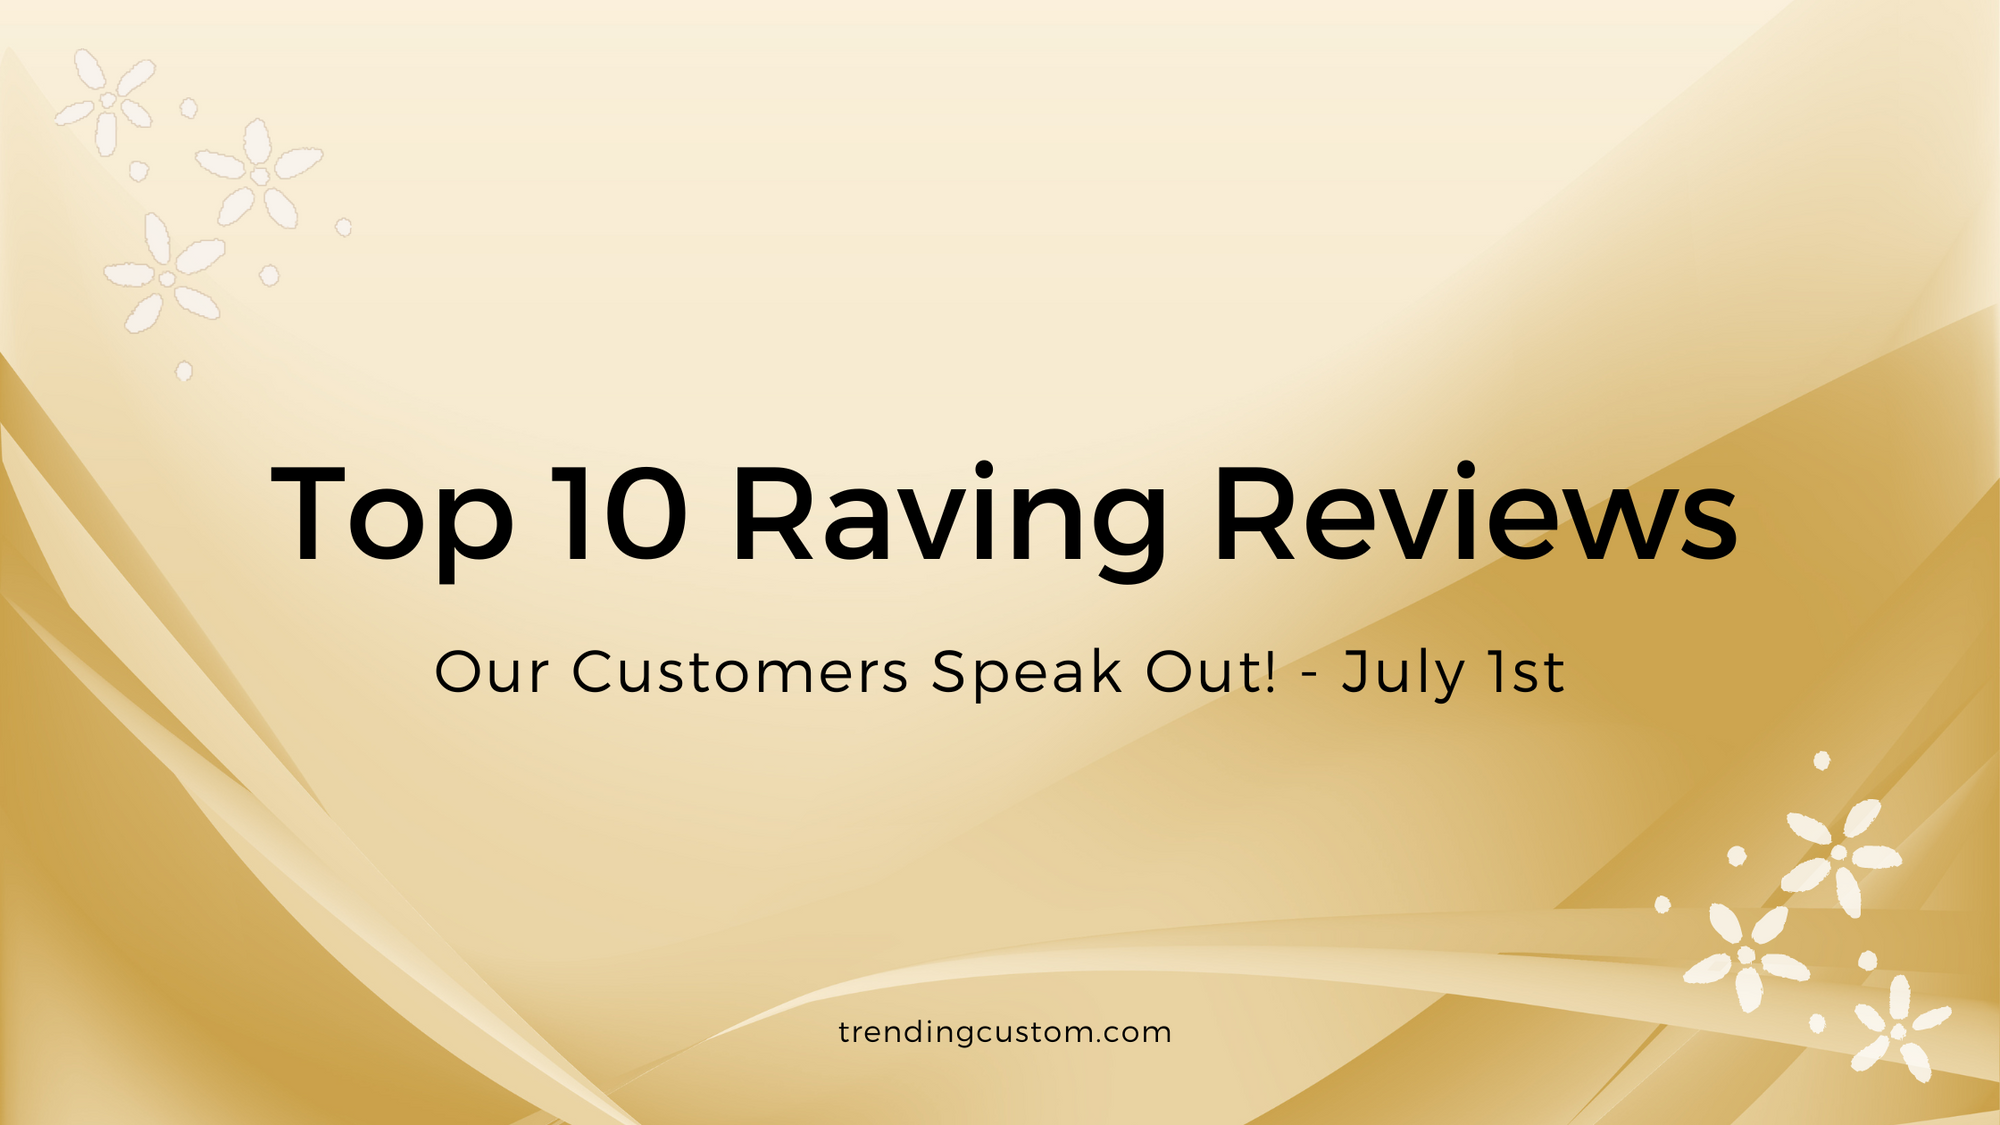 Top 10 Raving Reviews: Our Customers Speak Out! - July 1st